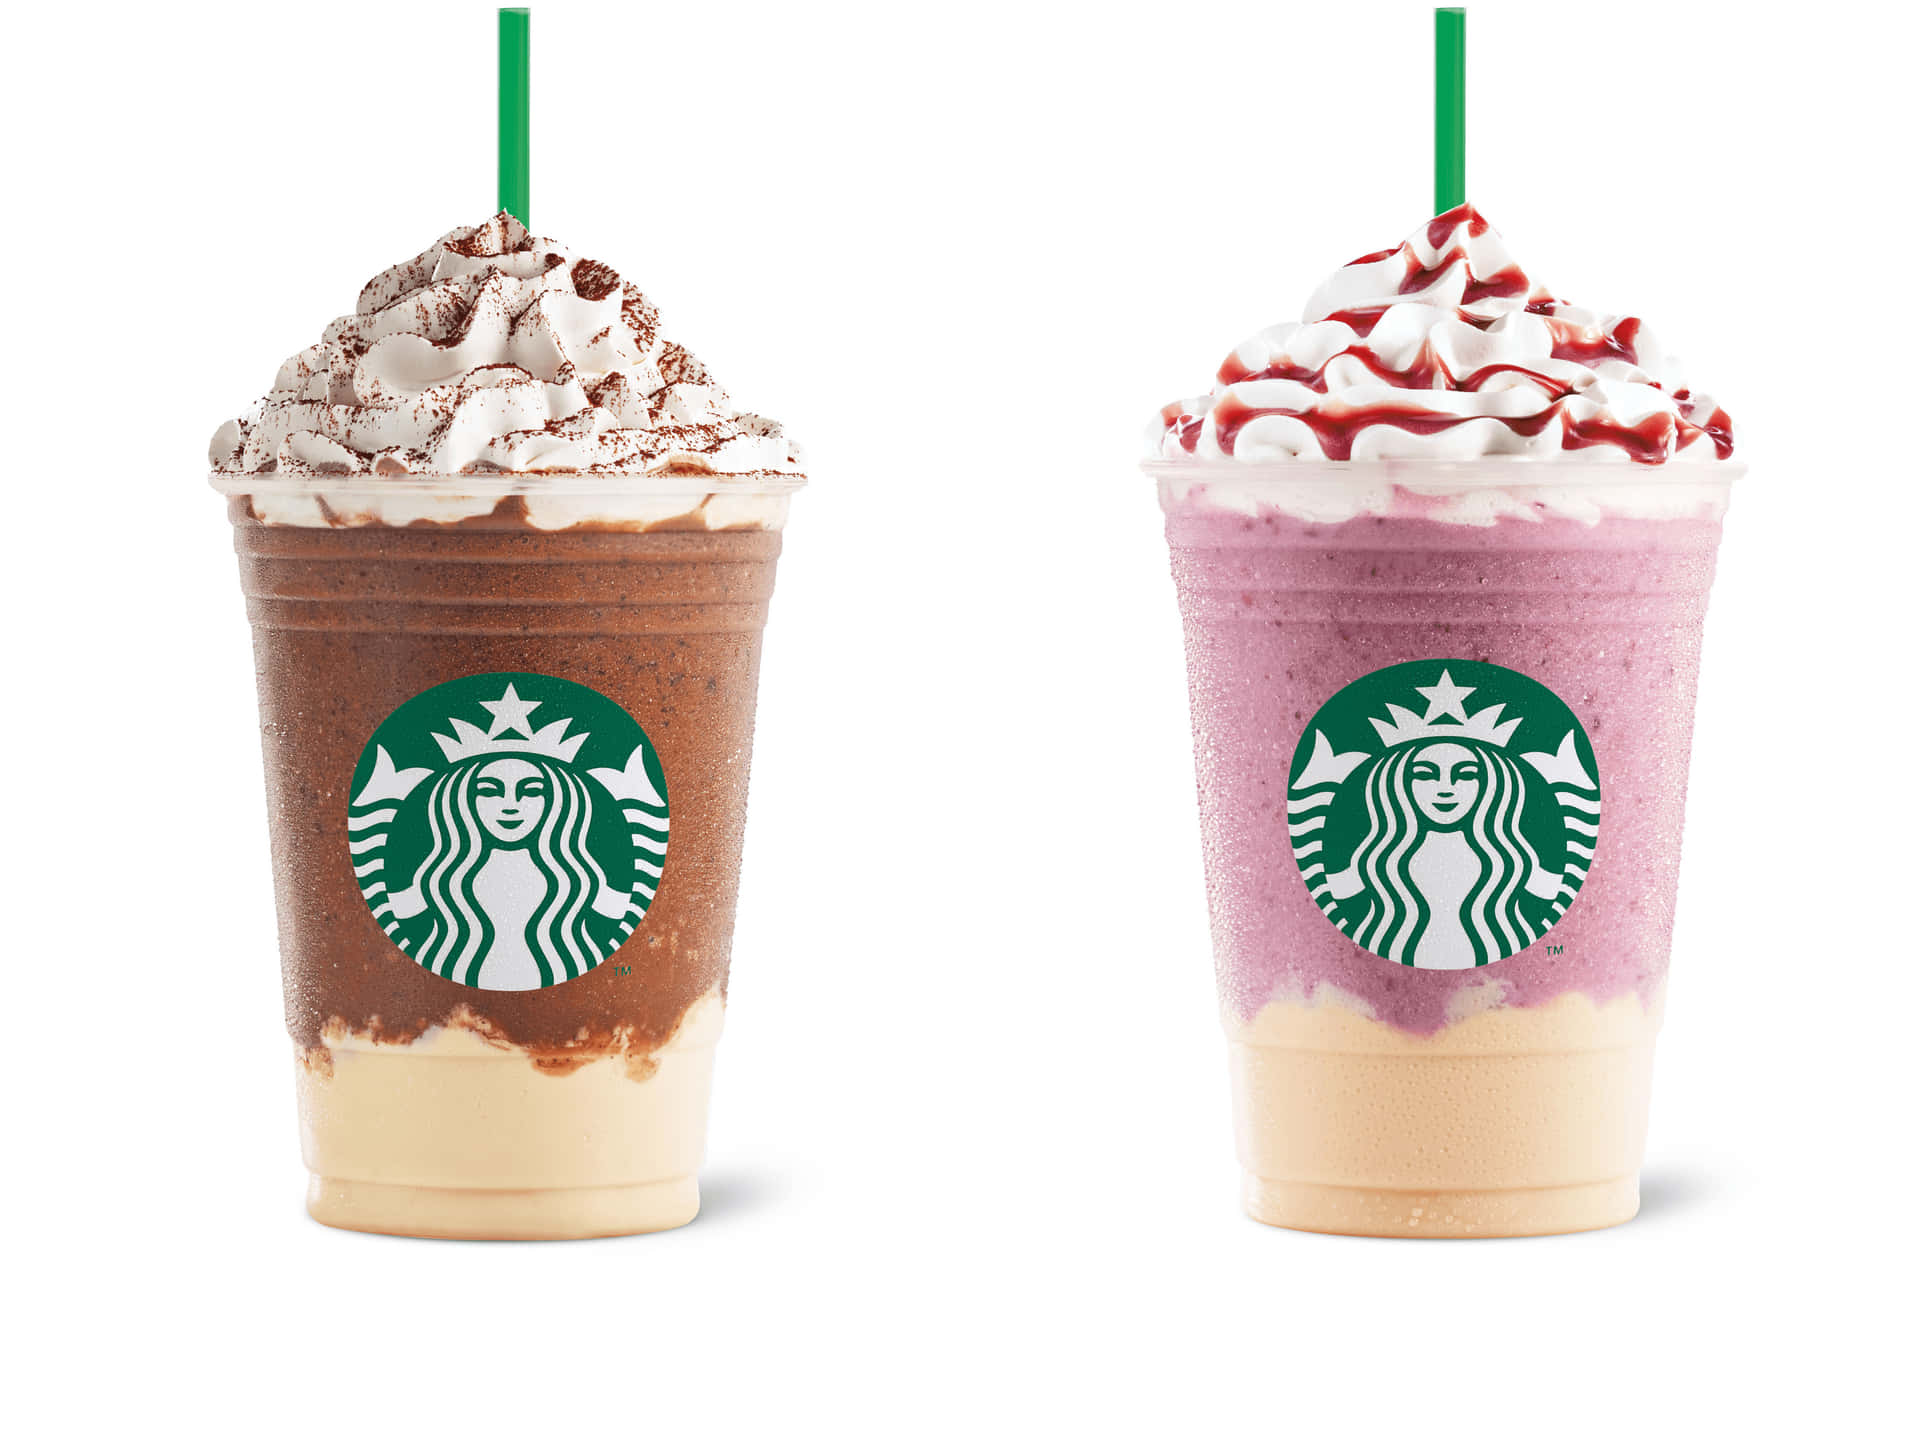 Enjoy your favourite Starbucks beverage with friends!